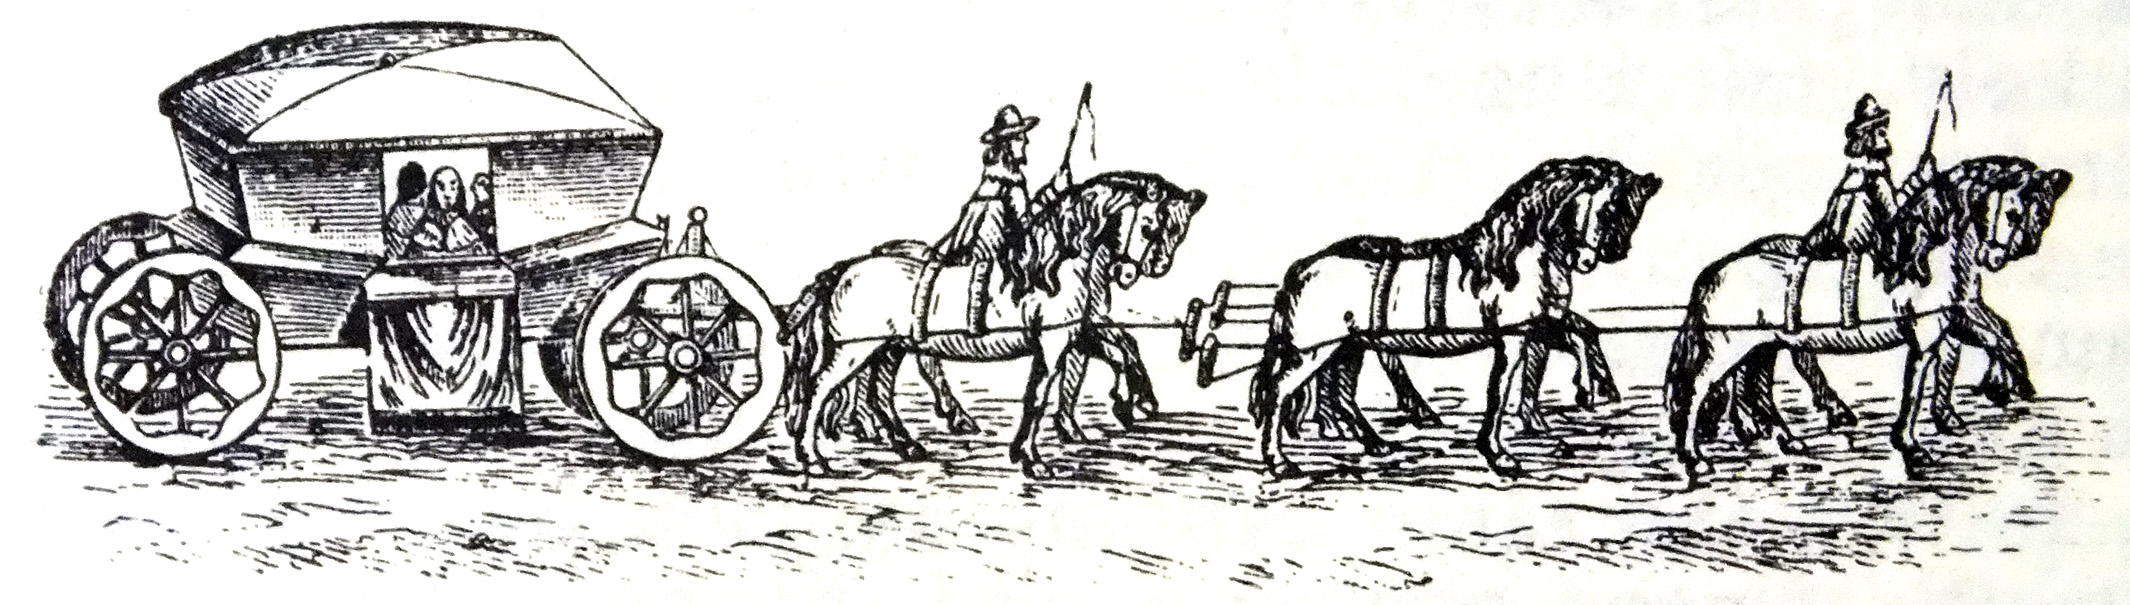 A 17th Century Carriage